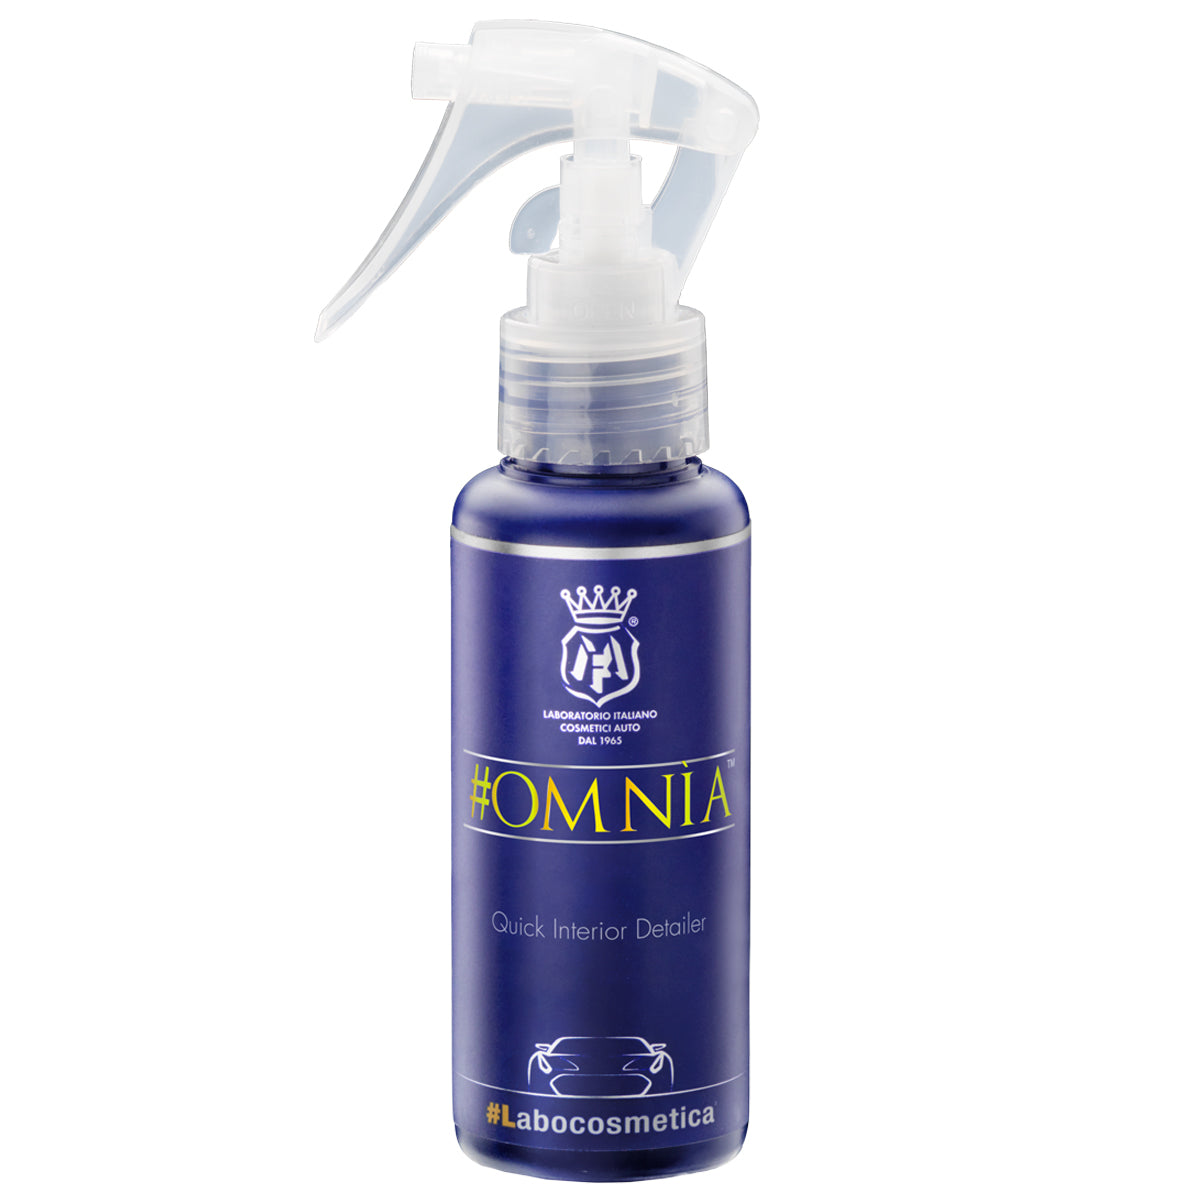 Labocosmetica Omnia interior cleaner bottle. Antiviral cleaner. Labcosmetica Cork Ireland.Labocosmetica Omnia interior cleaner bottle. Safe on interior and leather. Suitable for wet vac and Tornador. Antiviral cleaner. Labcosmetica Cork Ireland.